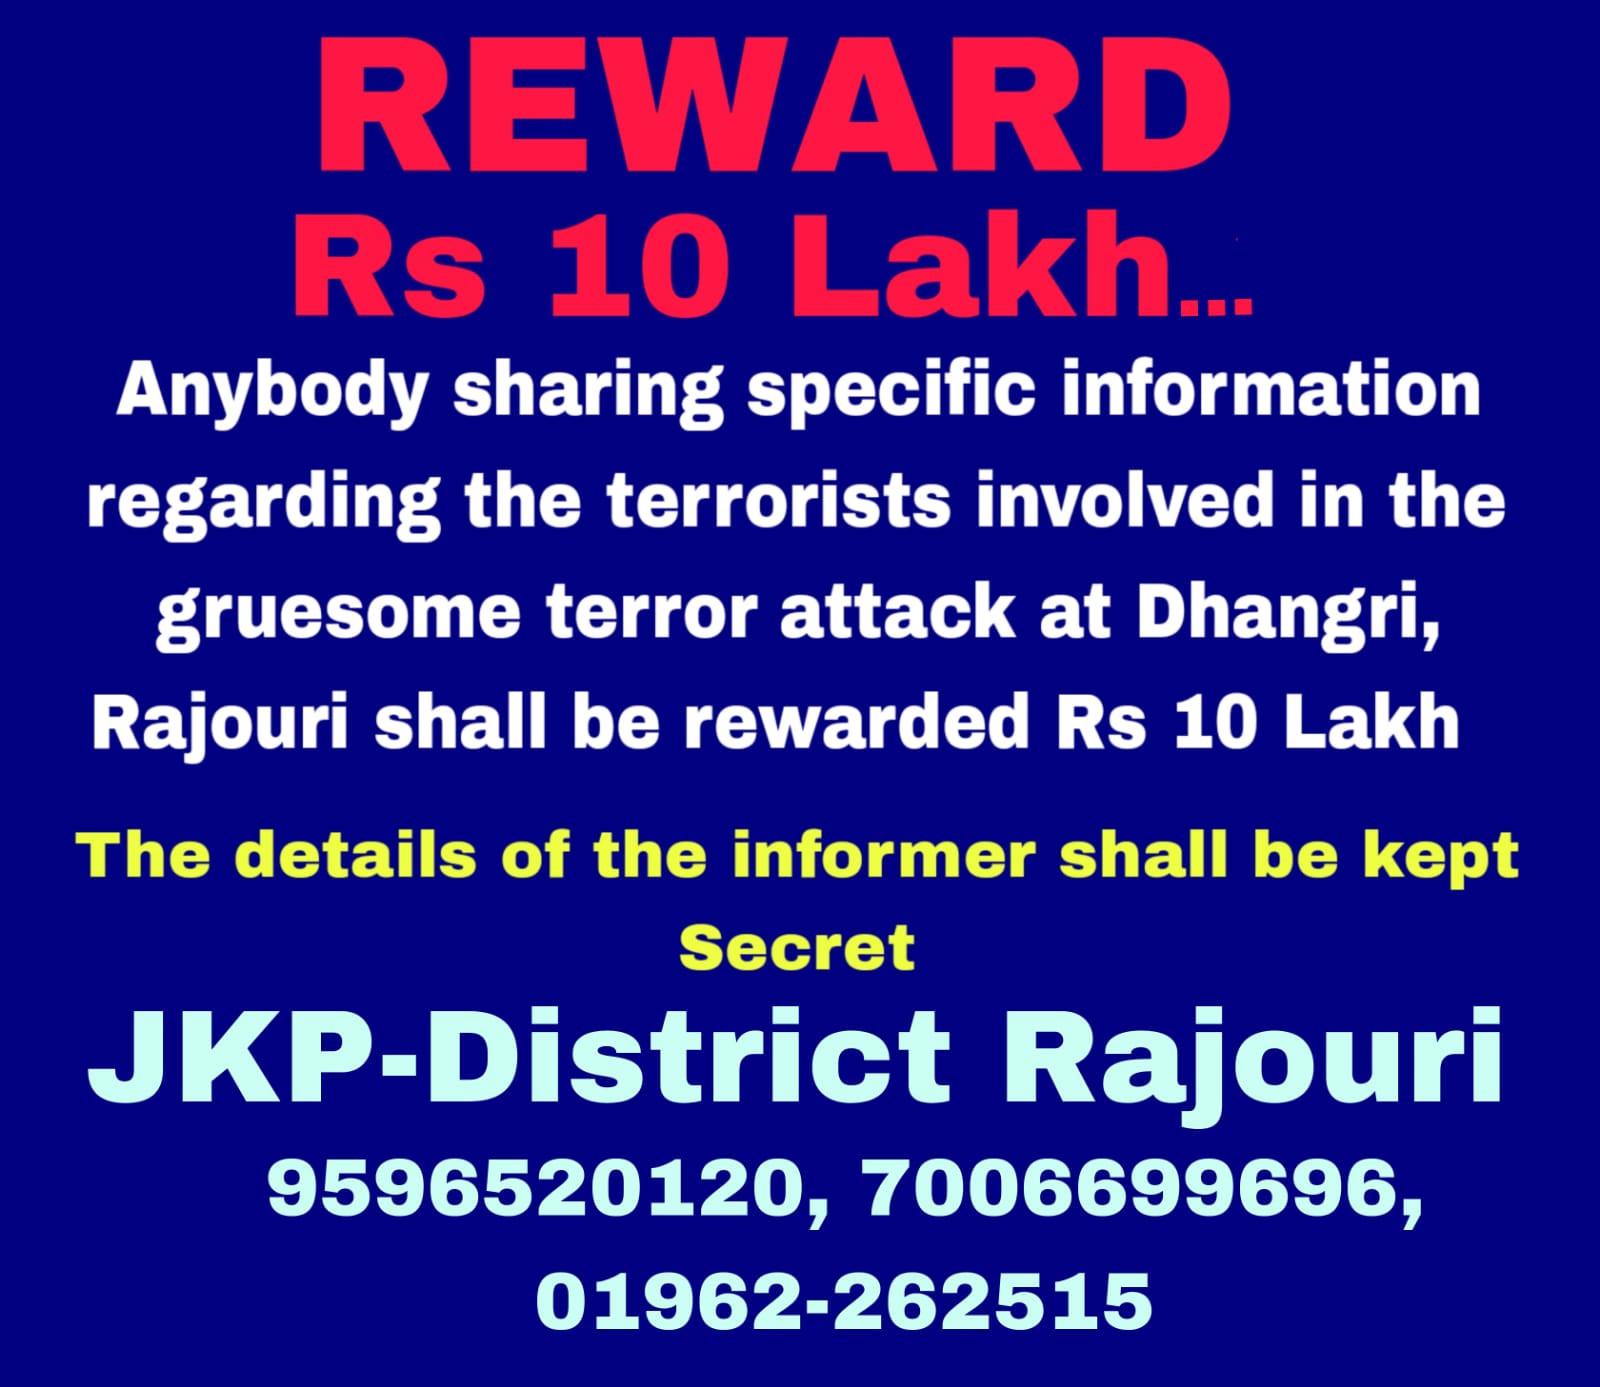 J&K Police announces reward for giving any information about terrorists